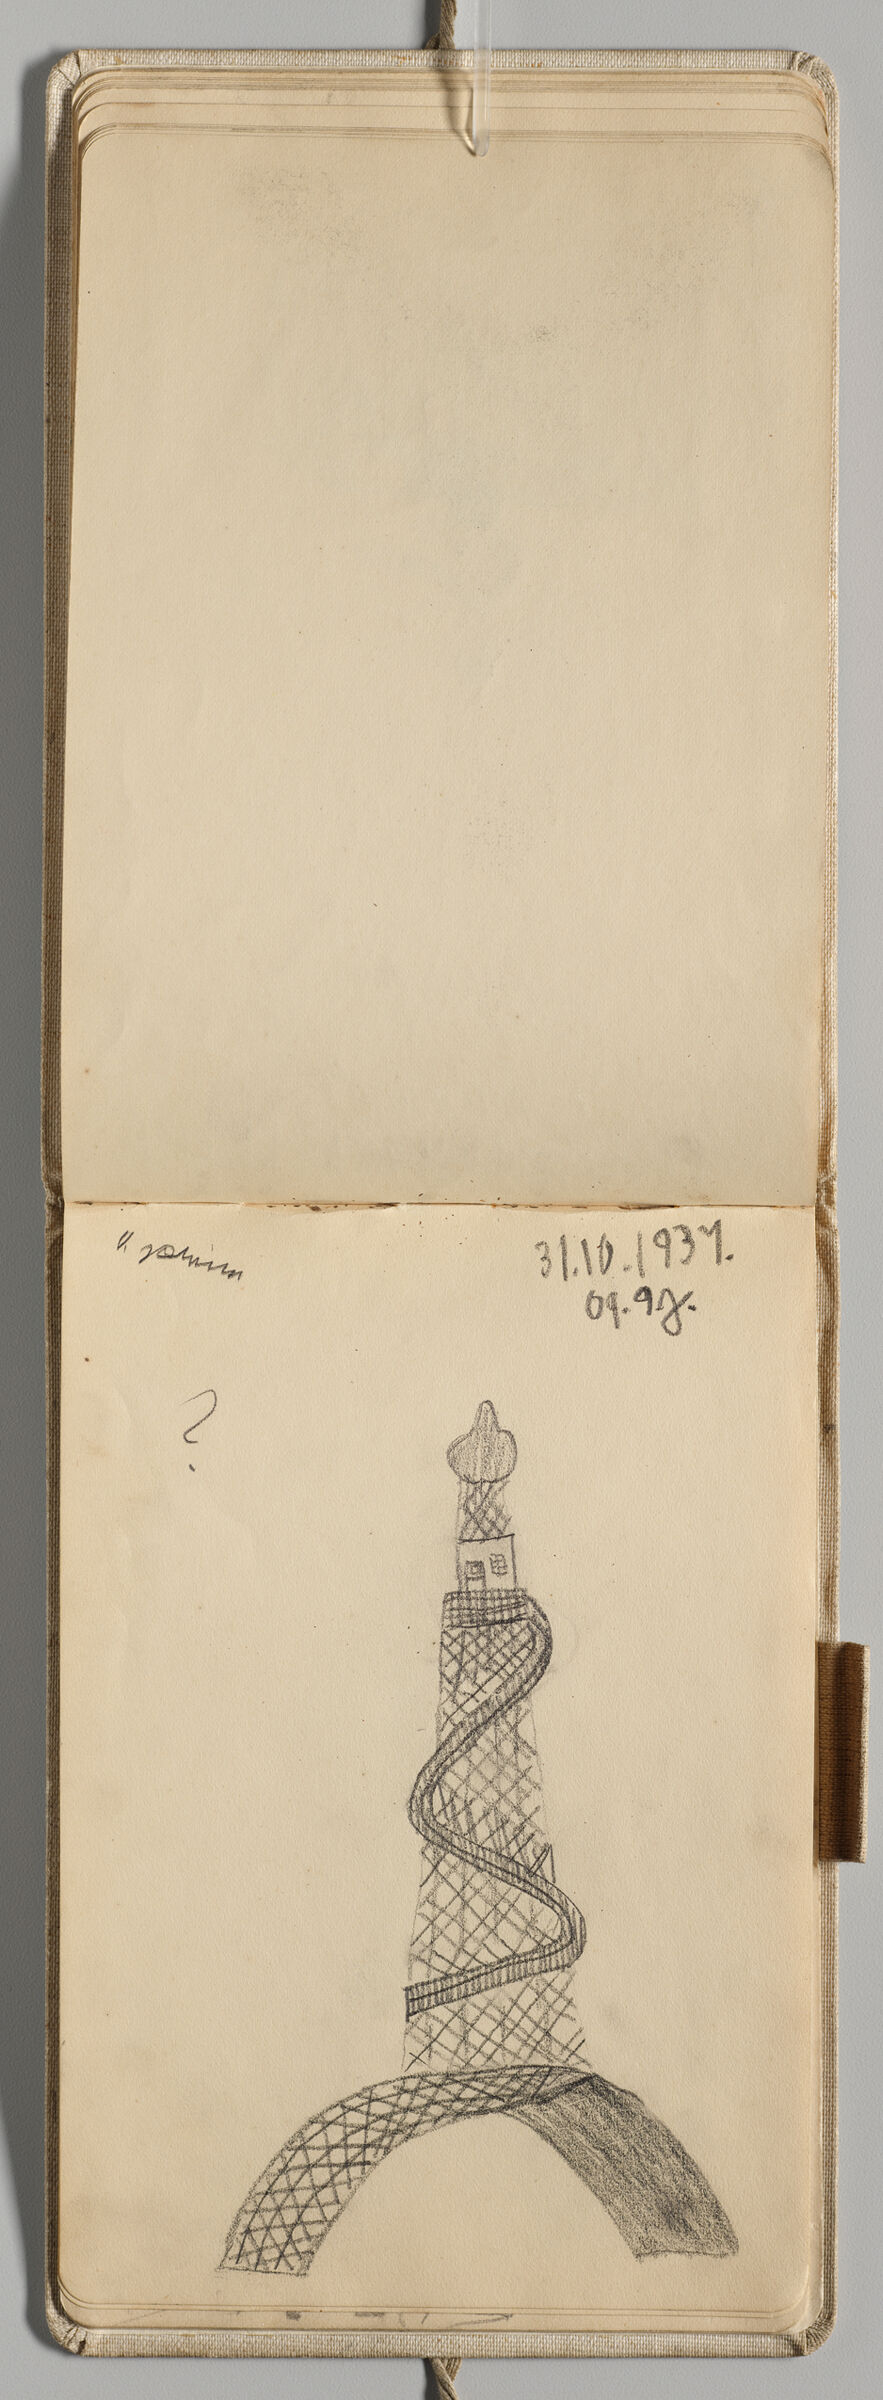 Untitled (Blank, Left Page); Untitled (Tower With Spiral Stairway, Right Page)